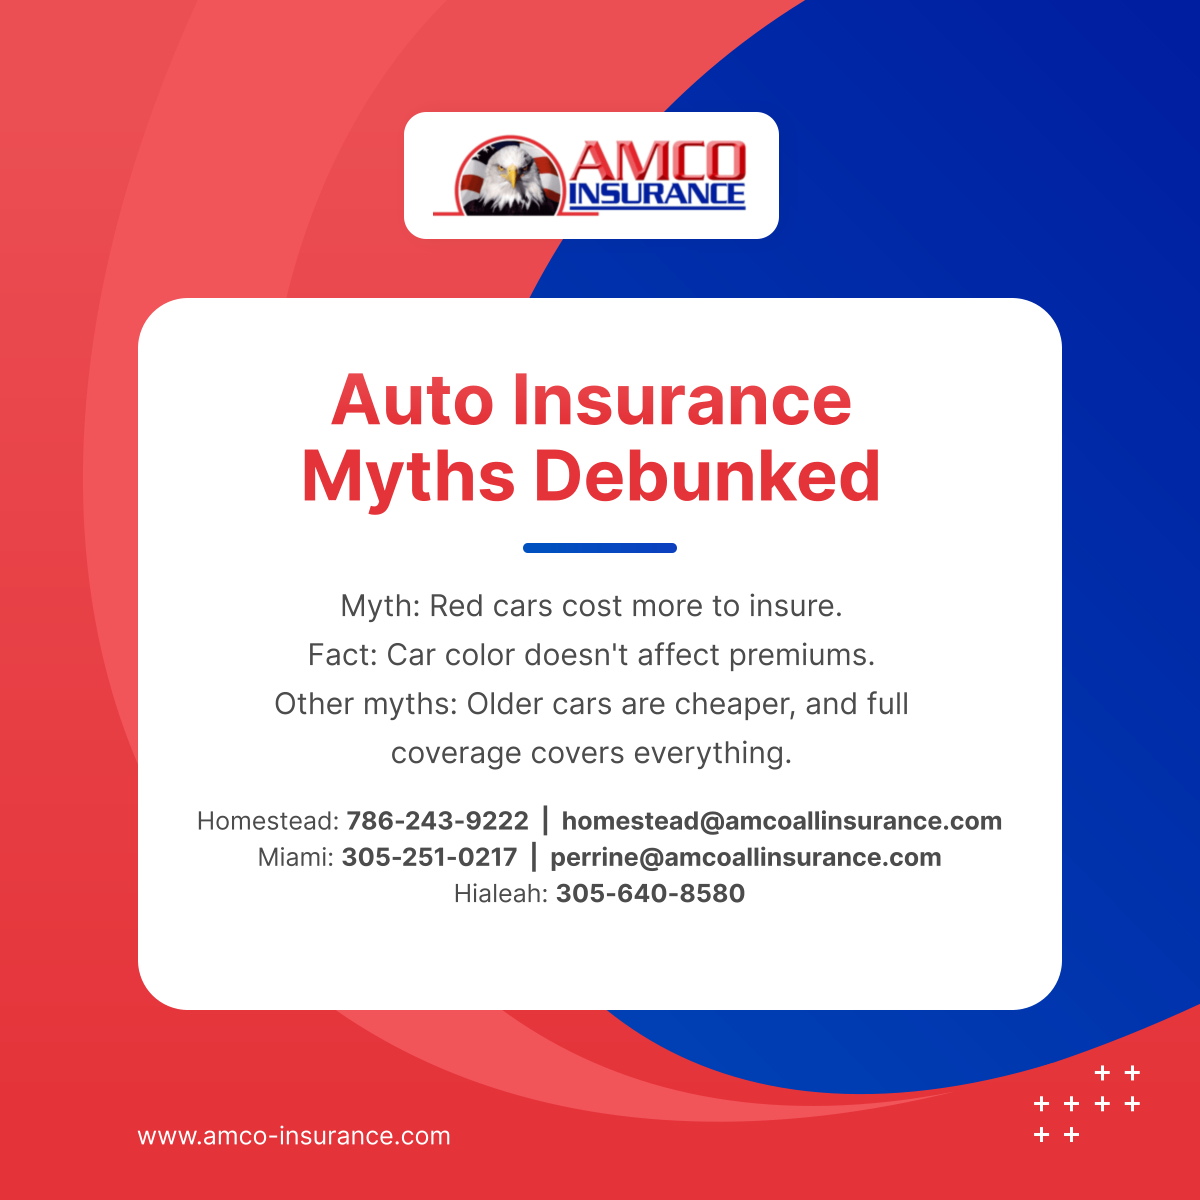 Don't fall for common auto insurance myths. Knowing the facts helps you make informed decisions about your coverage. Protect your ride with confidence. 

#HomesteadFL #AmcoInsurance #InsuranceServices #AutoInsuranceFacts #InsuranceMyths